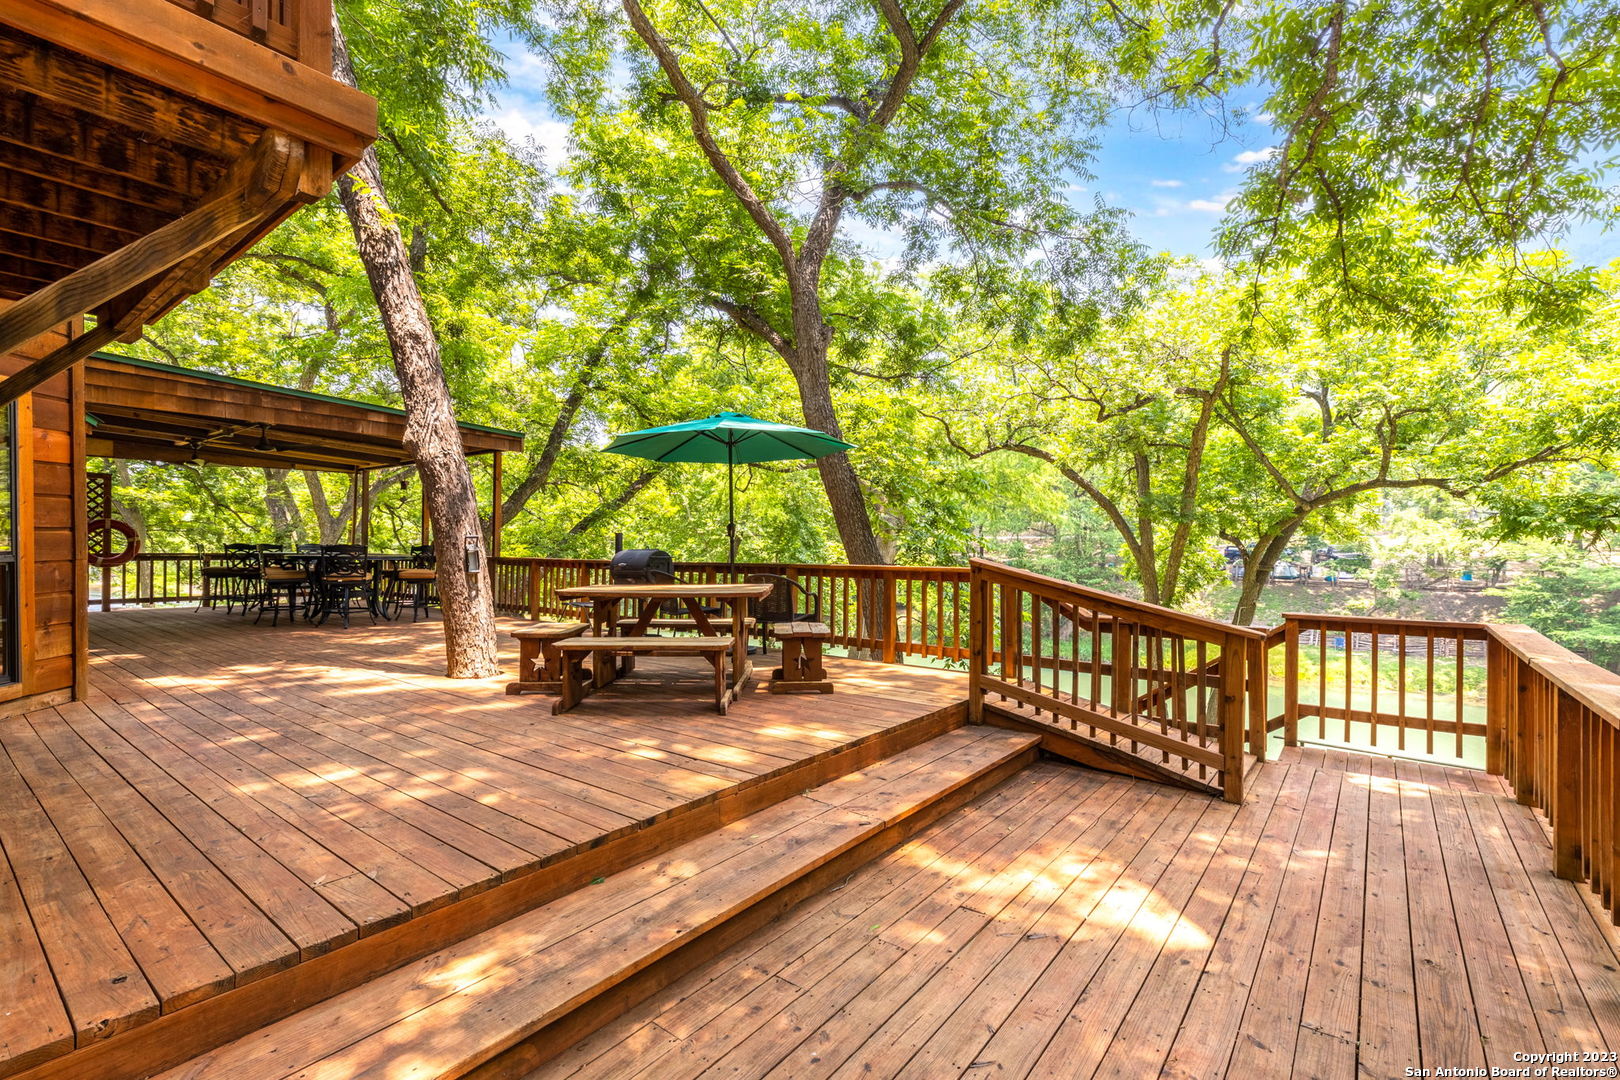 a view of a wooden deck with a patio